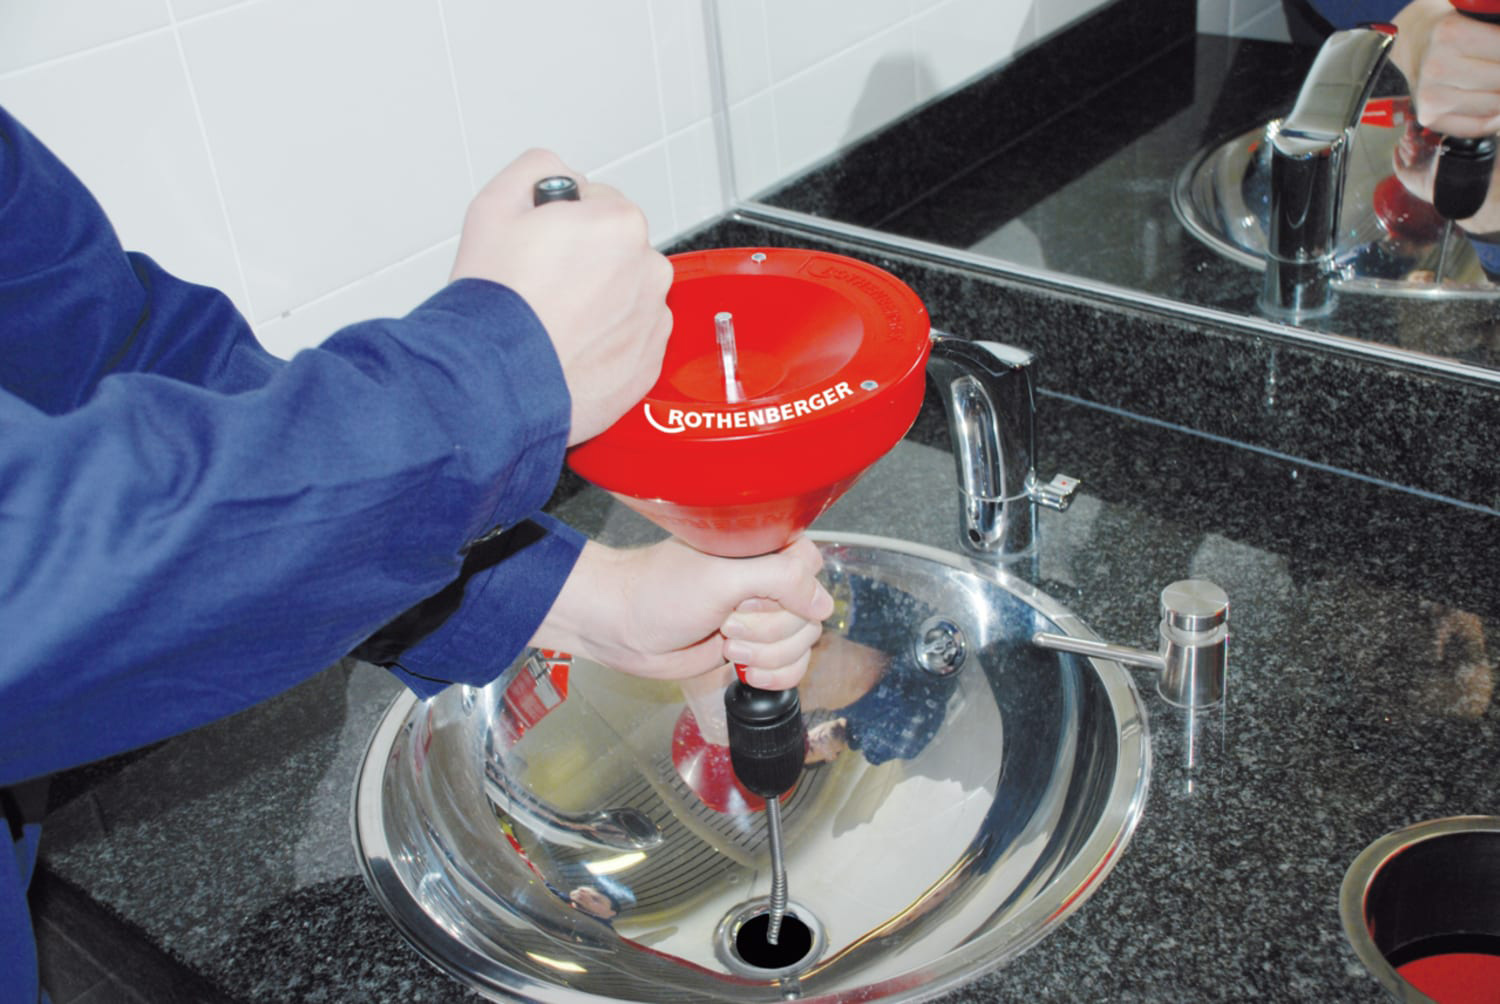 Rothenberger Rospi H&E Plus Drain Cleaner with Spiral being used in a sink.